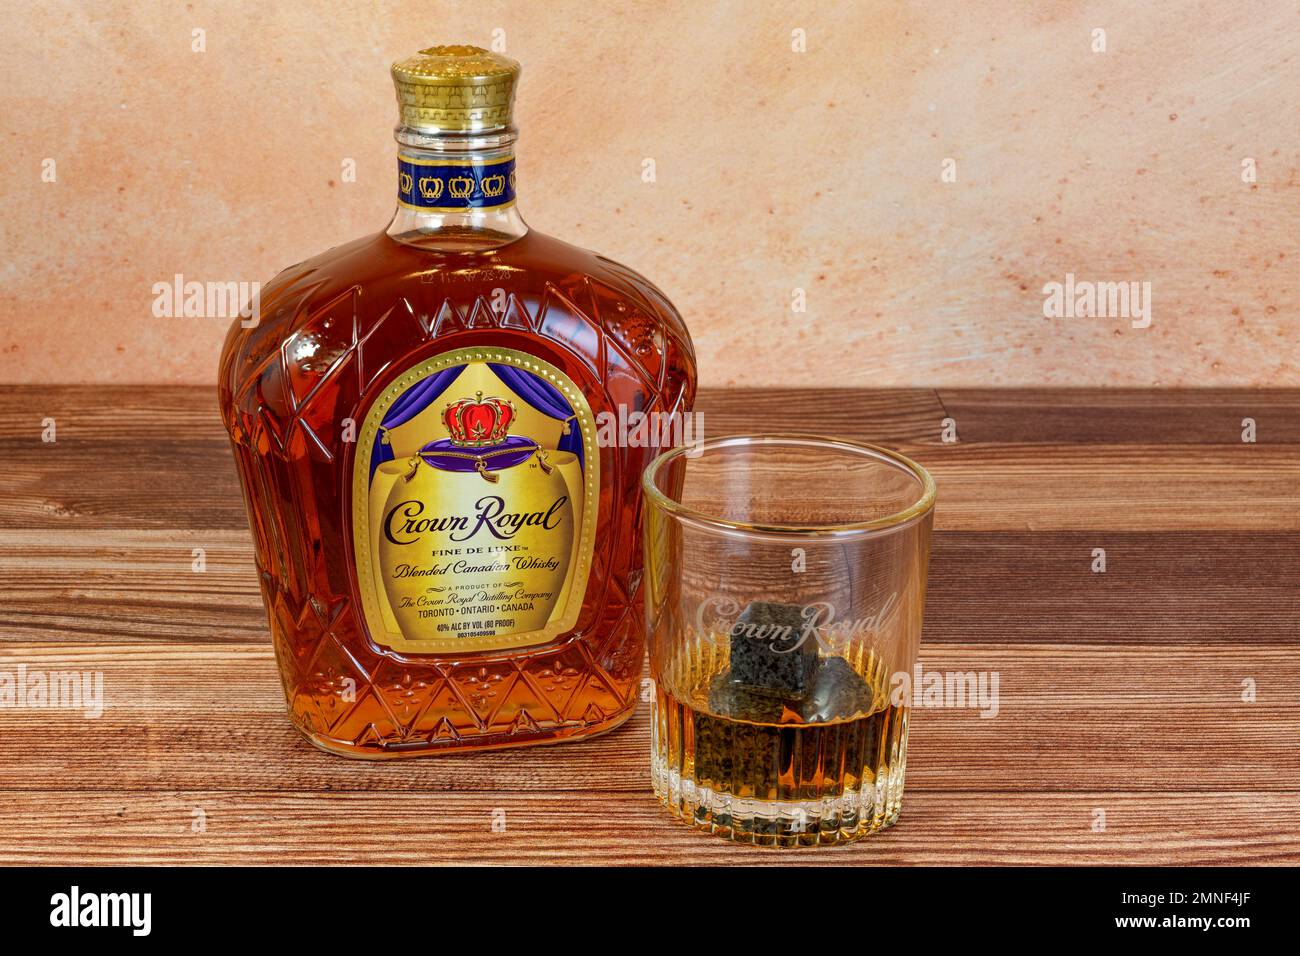 Flourtown, PA - Jan. 22, 2023: Crown Royal Blended Canadian Whisky bottle and glass with a drink over whiskey stones. Stock Photo